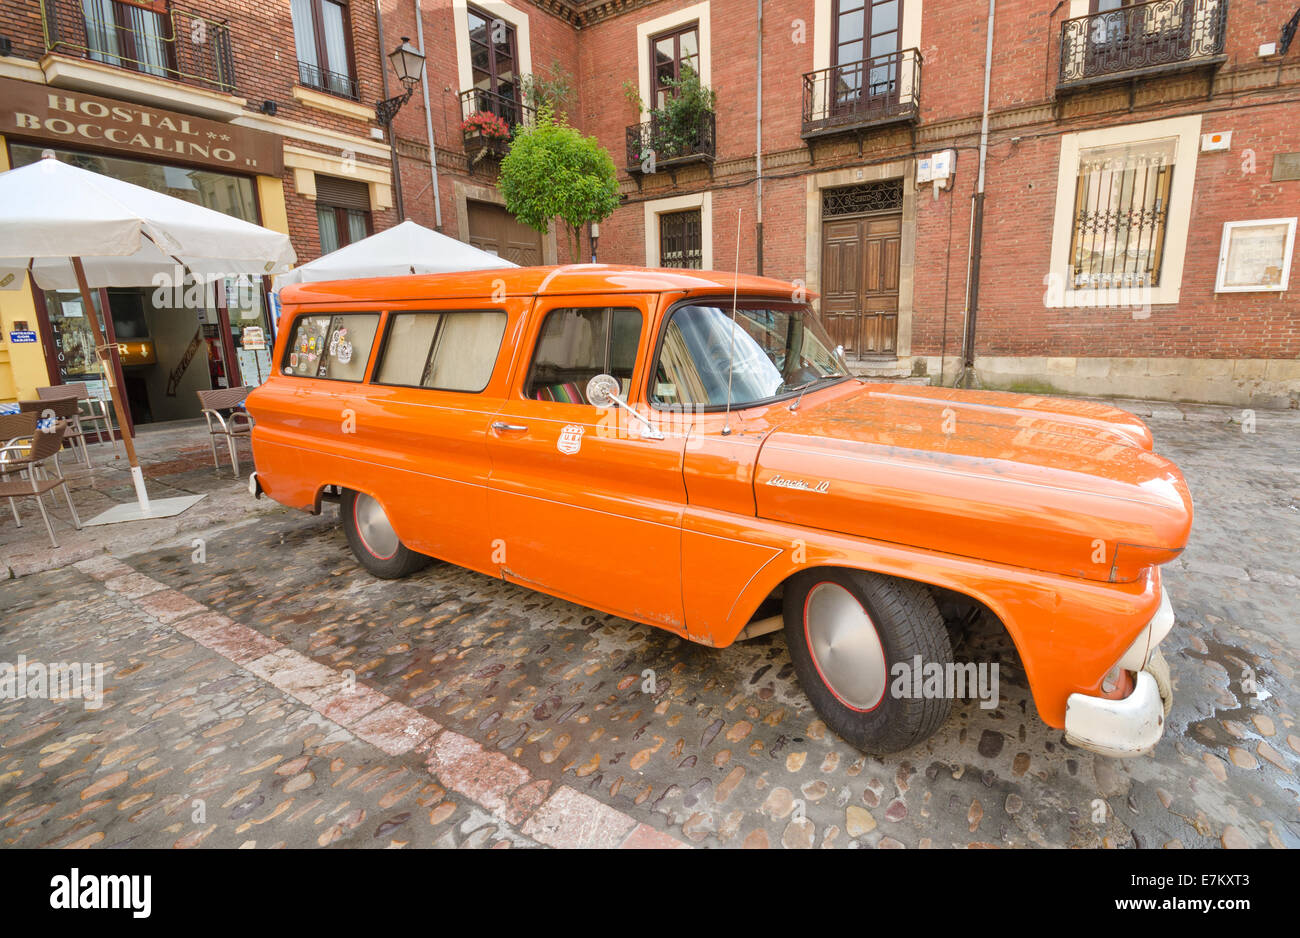 LEON, SPAIN - AUGUST, 22: Orange 1960 Chevy Apache truck car showed in the exterior of a restaurant in Leon, Spain on August 22, Stock Photo